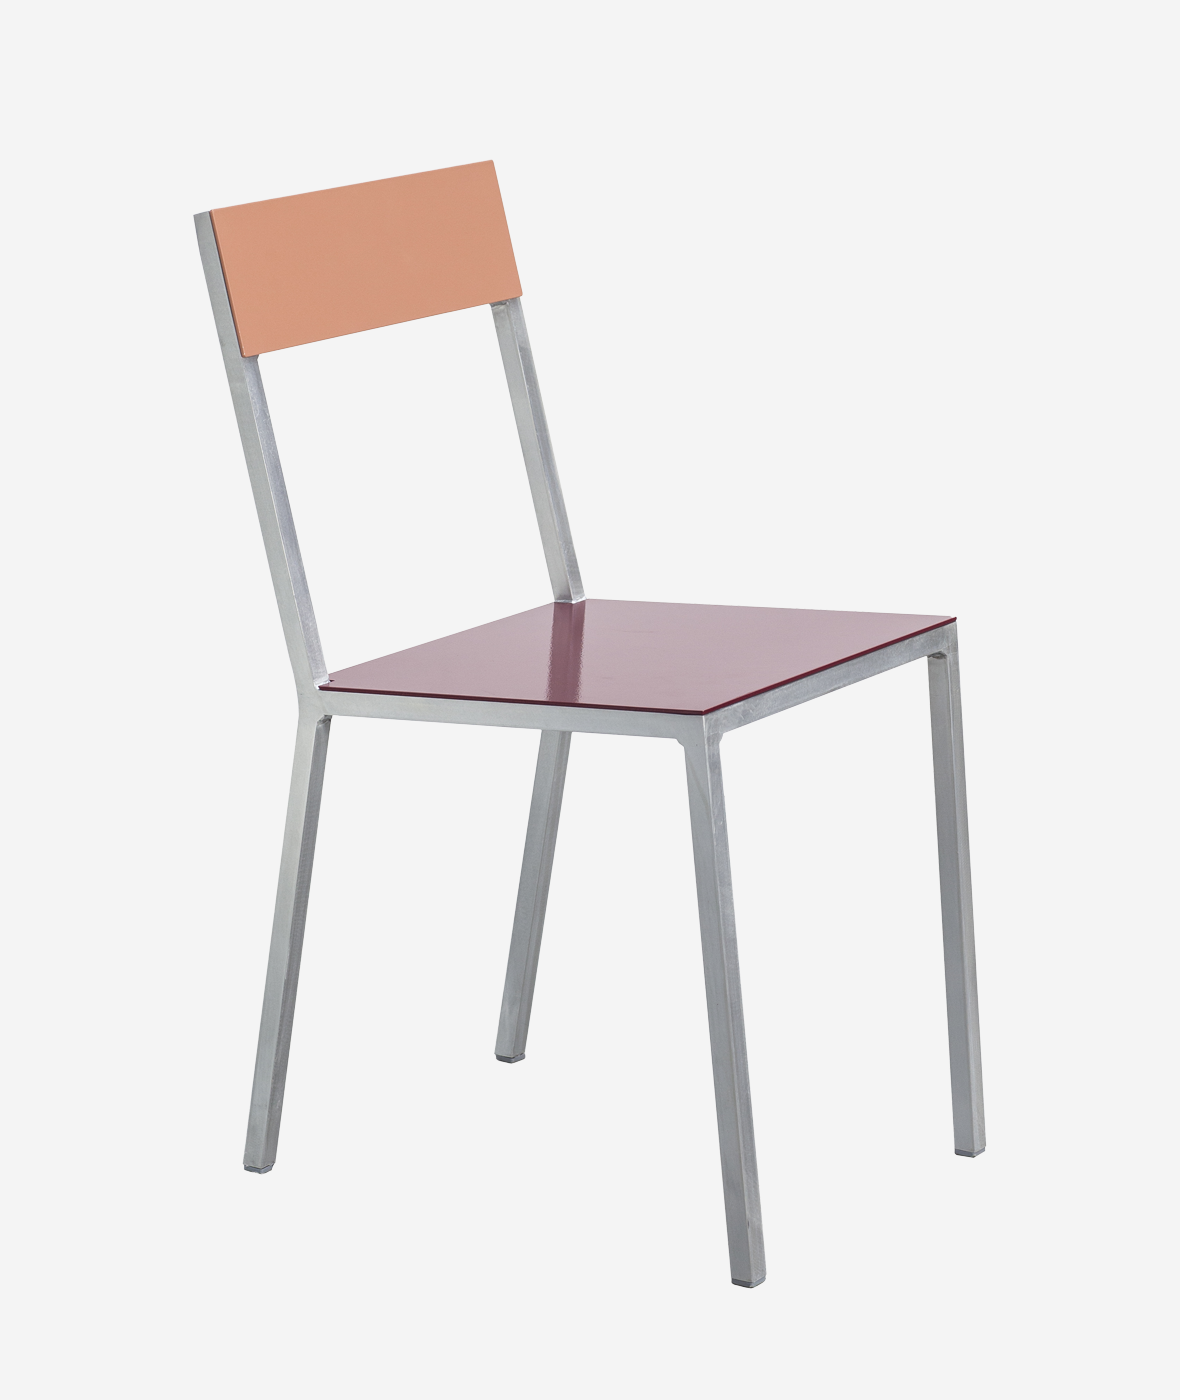 Alu Chair - More Options